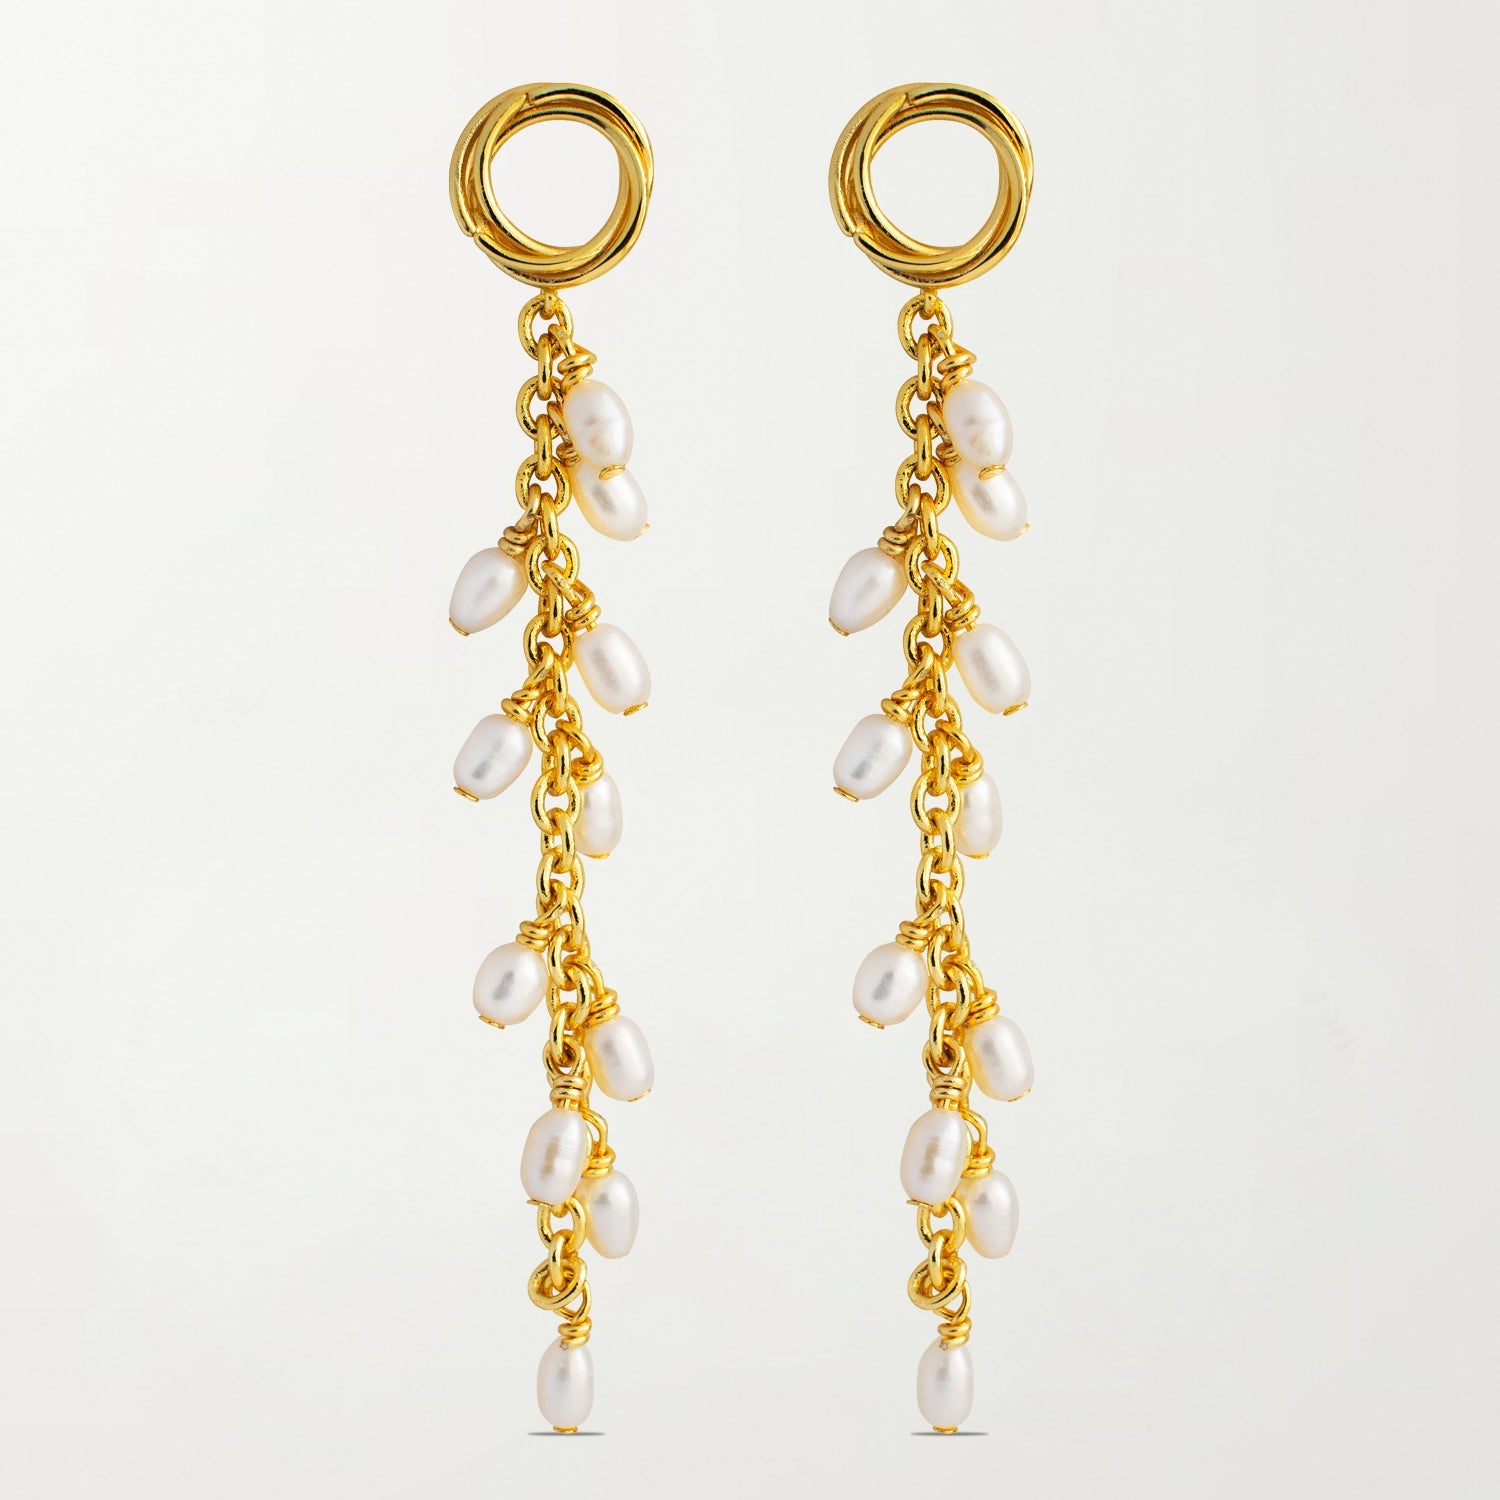 Picture of The Valencia Earrings